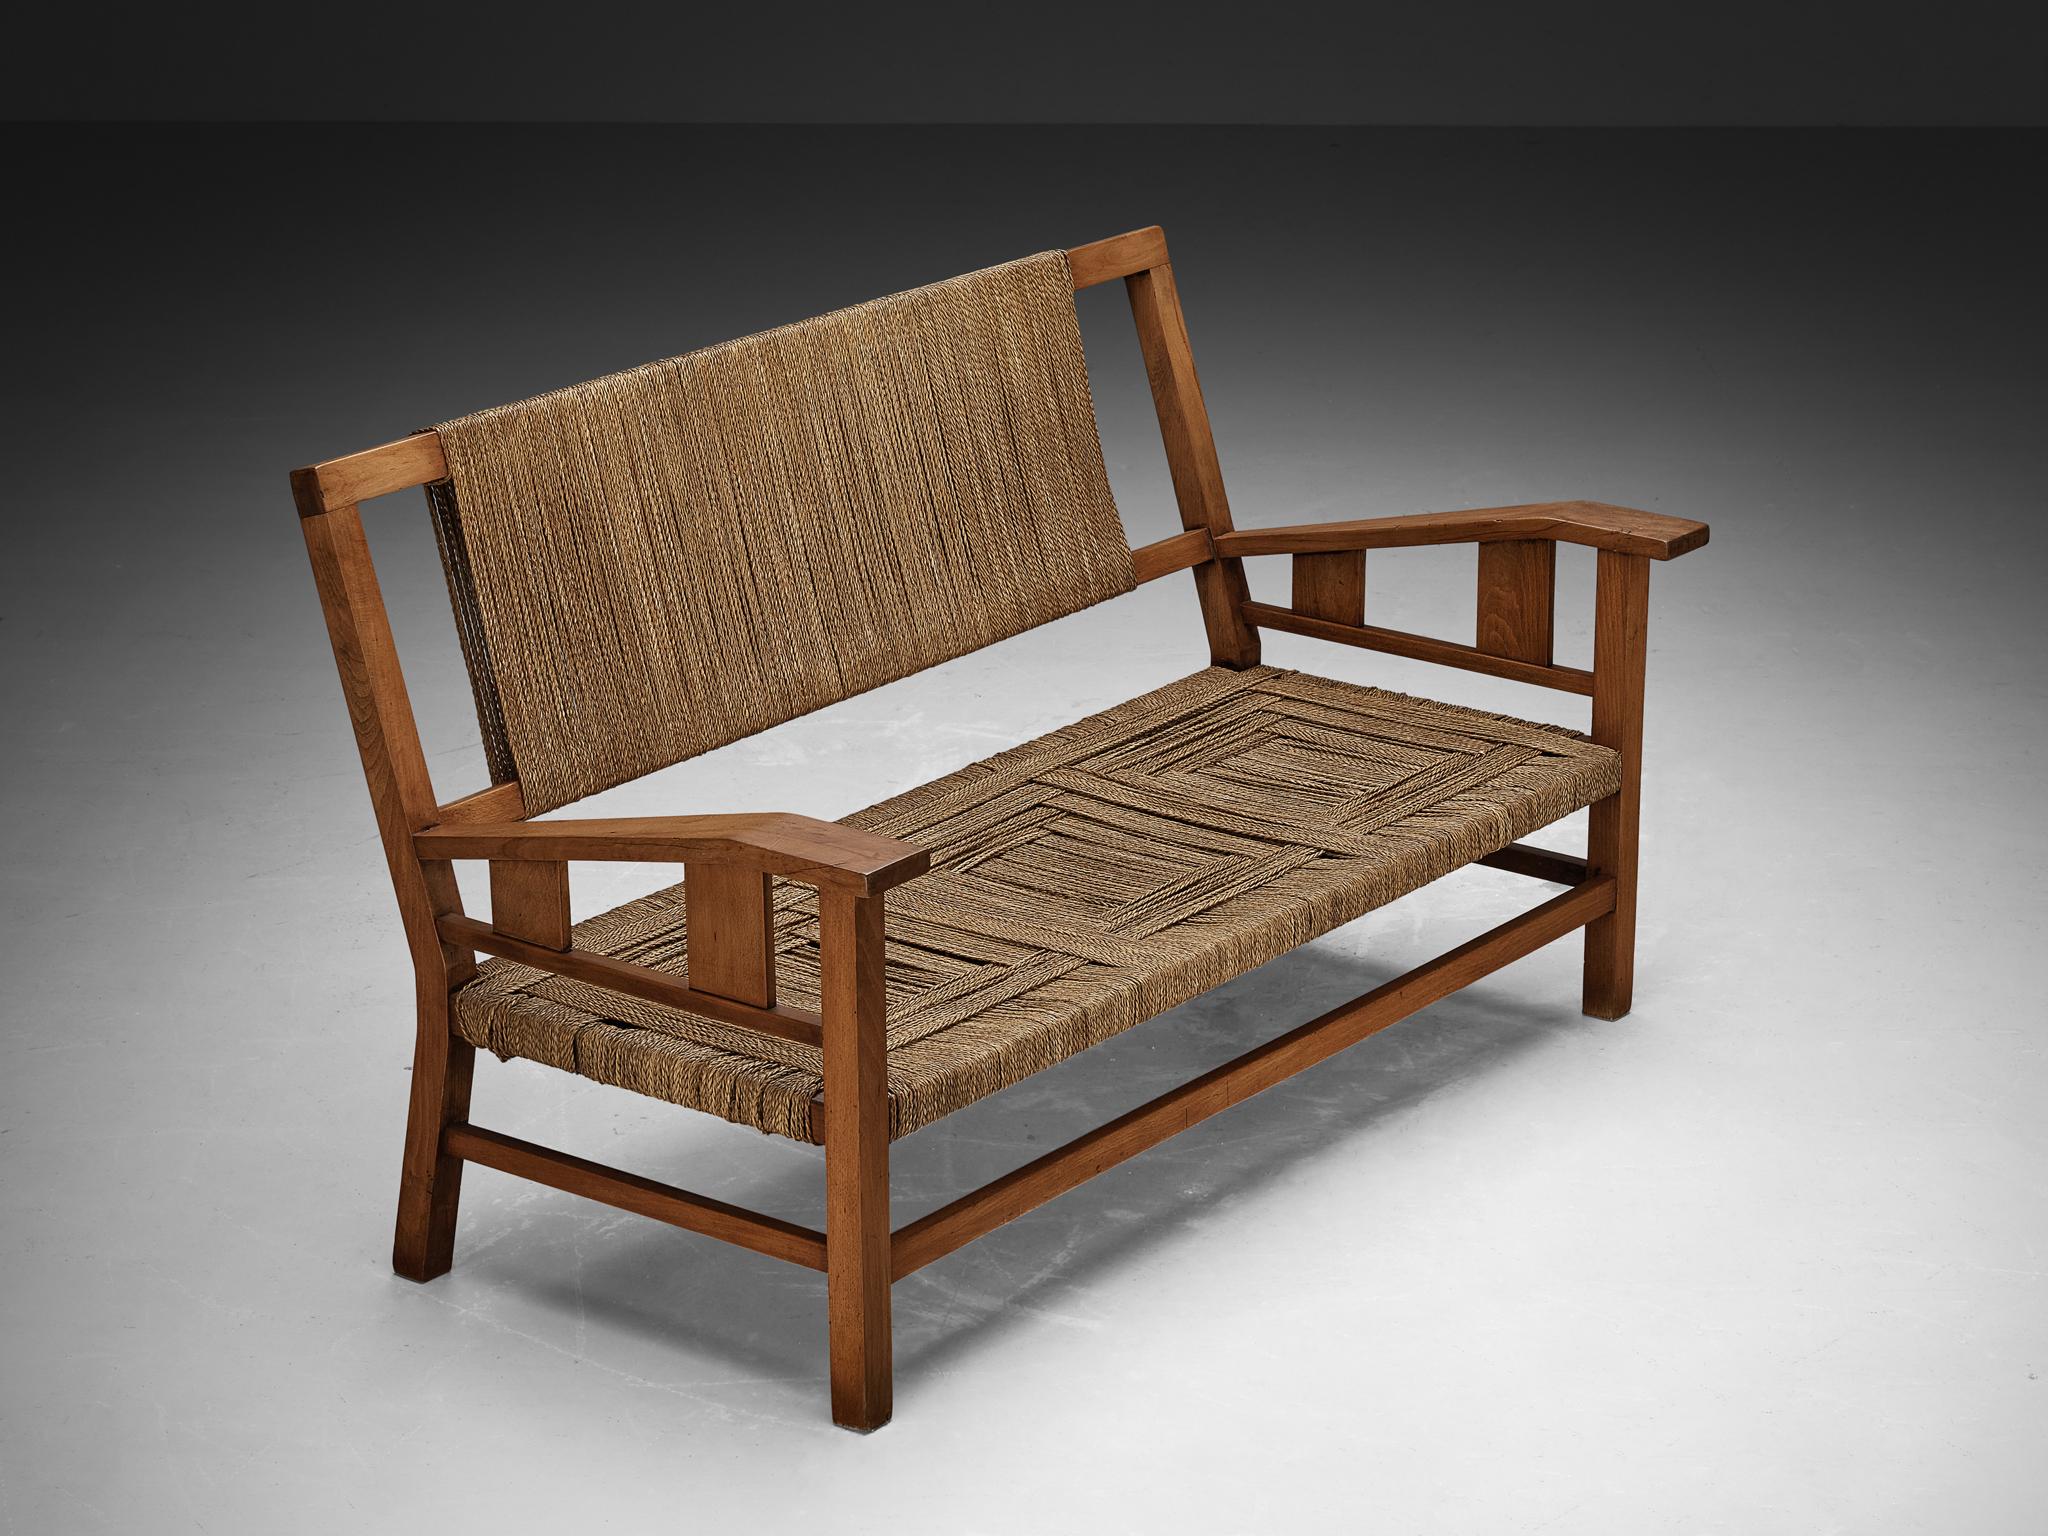 Francis Jourdain Sofa or Bench in Woven Straw and Wood